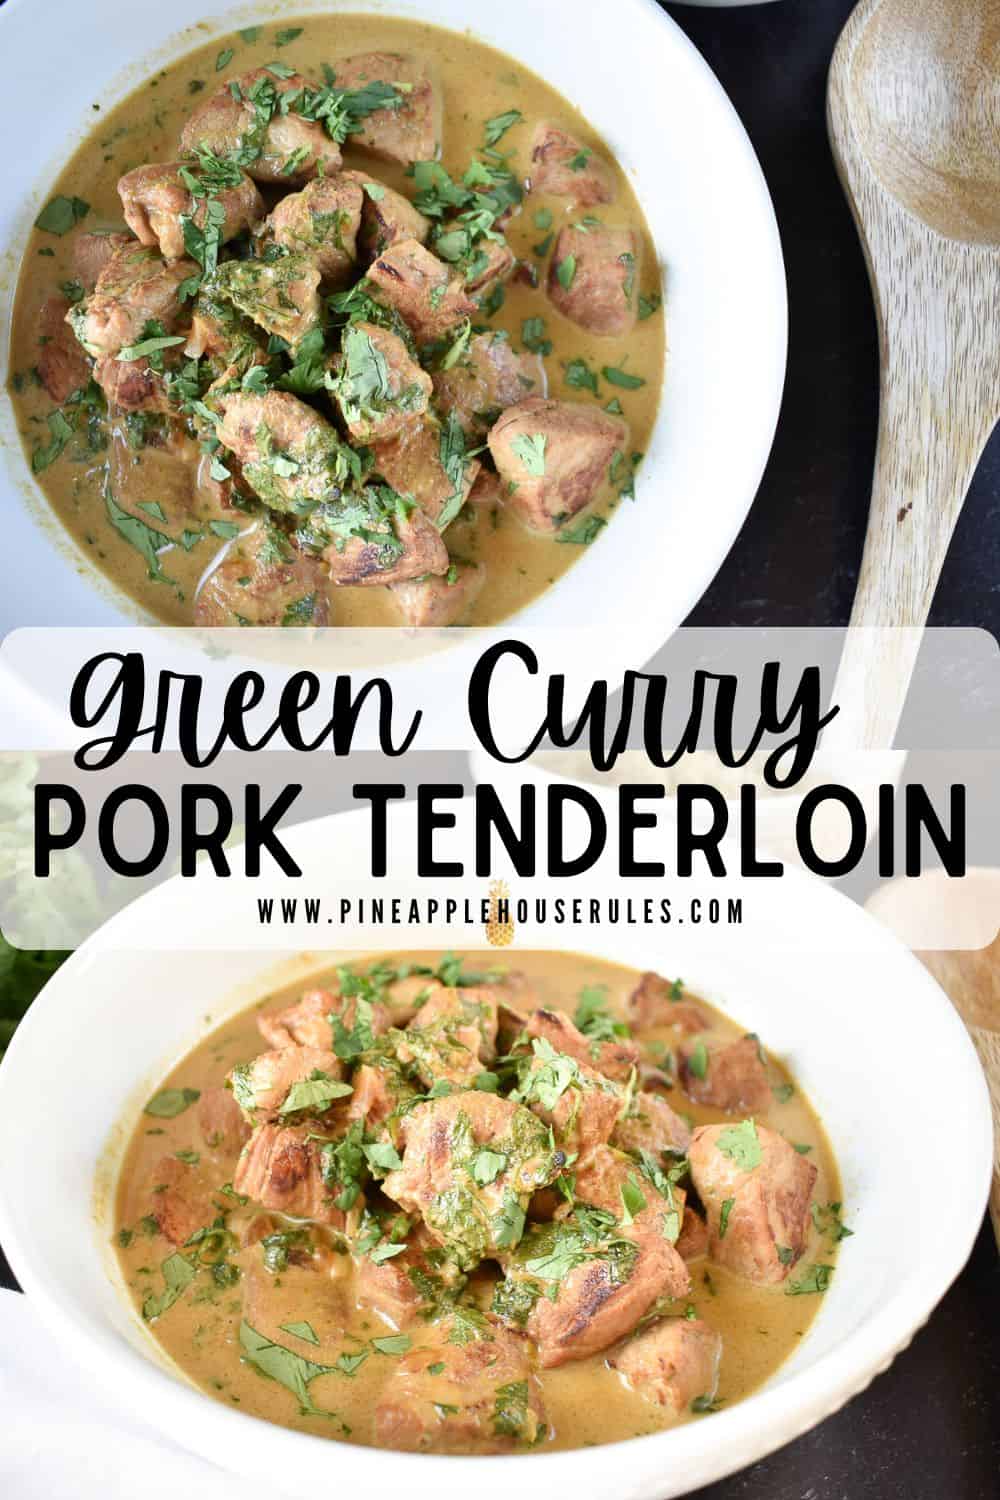 This Green Curry Pork Tenderloin is an easy, delicious dinner when you're pressed for time. The flavors are bold and the calories are low (less than 200 per serving), plus low in carbs and high in protein! We serve ours with low carb Cauliflower Rice or Steamed Jasmine Rice. Green Curry Pork Tenderloin | Keto | Easy Recipe | Low Carb | Green Curry Recipes | Green Curry Pork Recipes | Green Curry Pork Coconut Milk | Low Carb Dinner Recipes | Green Curry Pork Tenderloin Sides | Easy Dinner